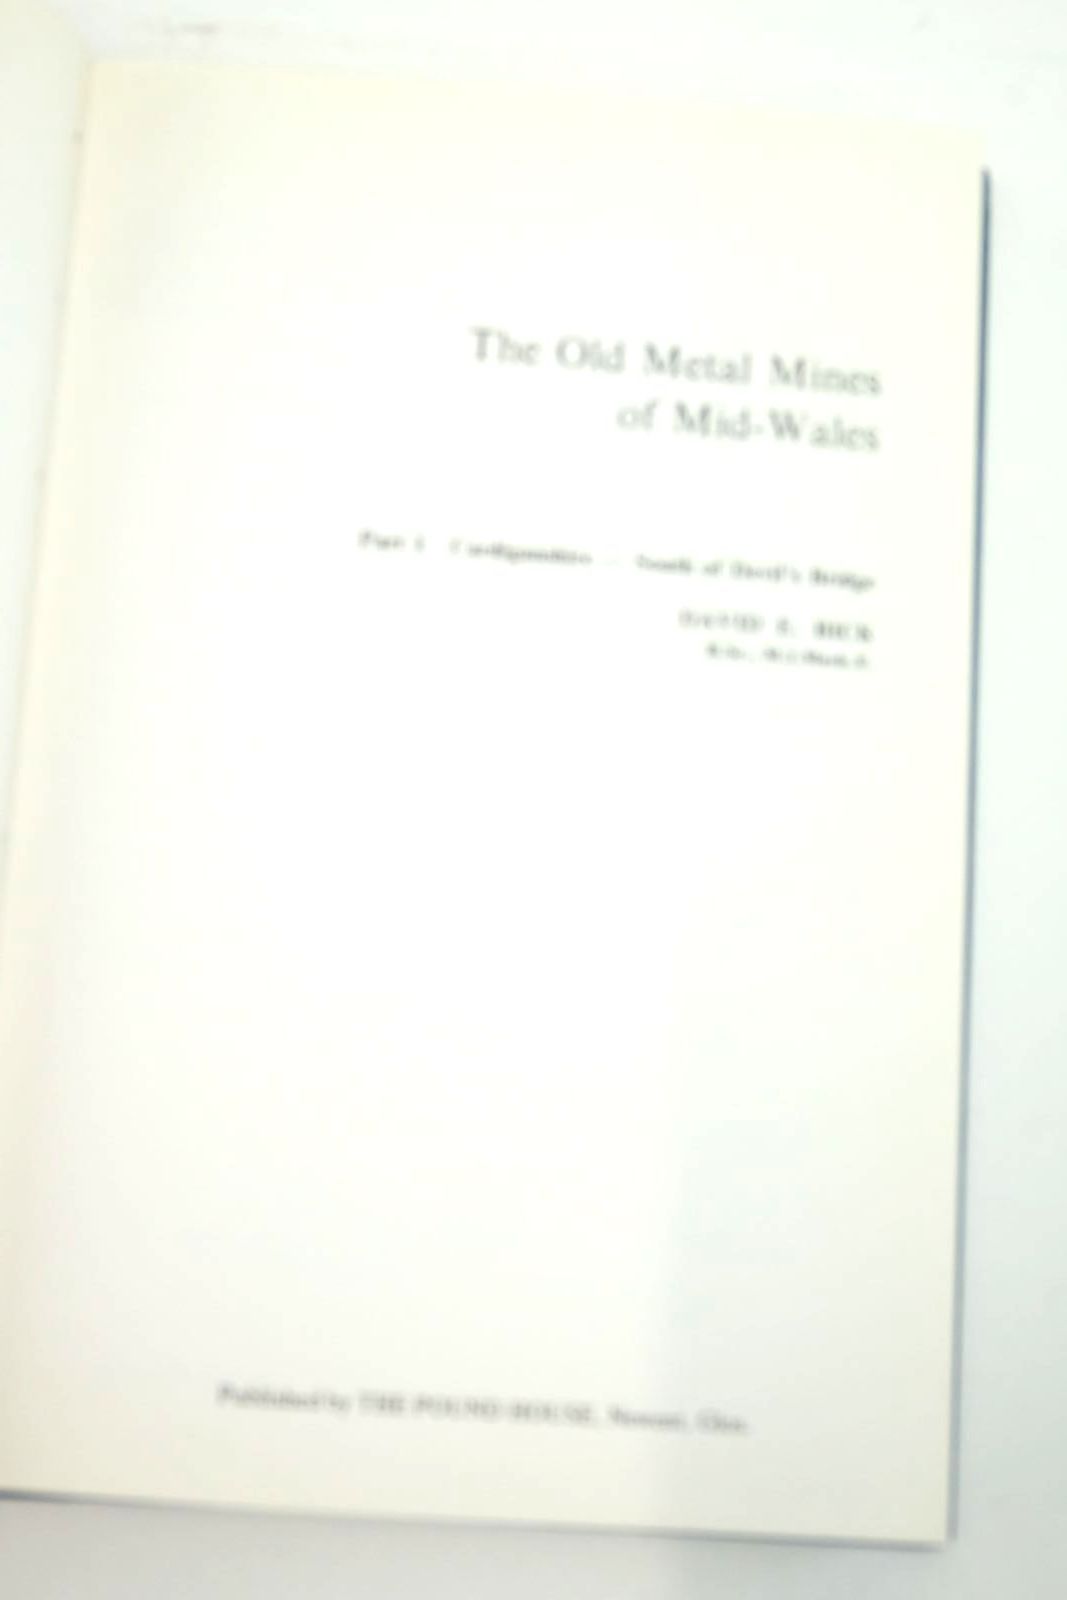 Photo of THE OLD METAL MINES OF MID-WALES PART 1 written by Bick, David E. published by The Pound House (STOCK CODE: 2135980)  for sale by Stella & Rose's Books